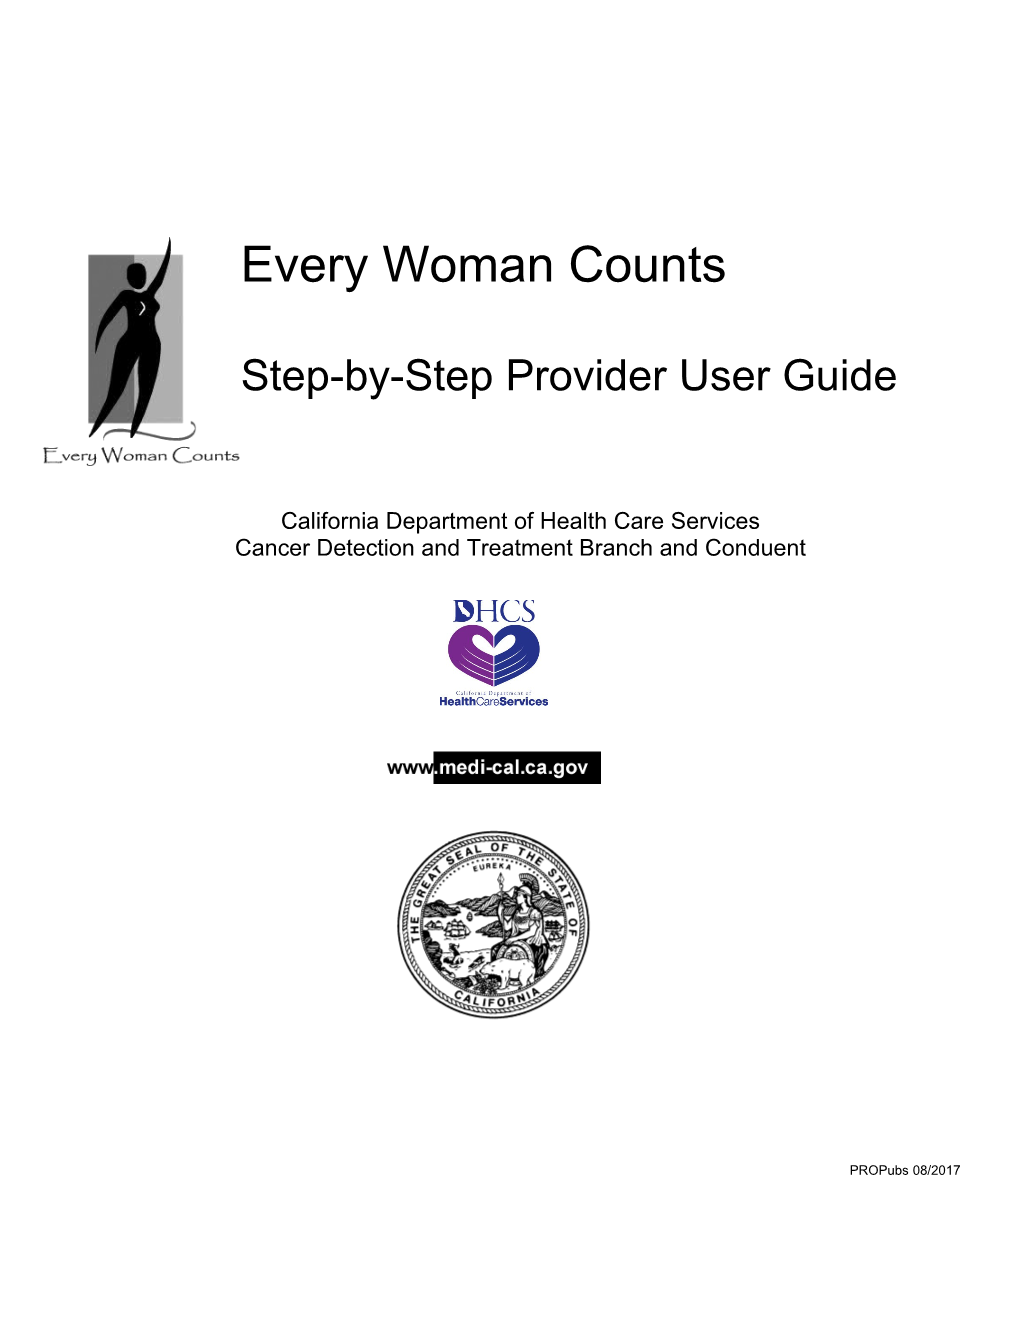 Every Woman Counts Step-By-Step Provider User Guide (Ewc00)